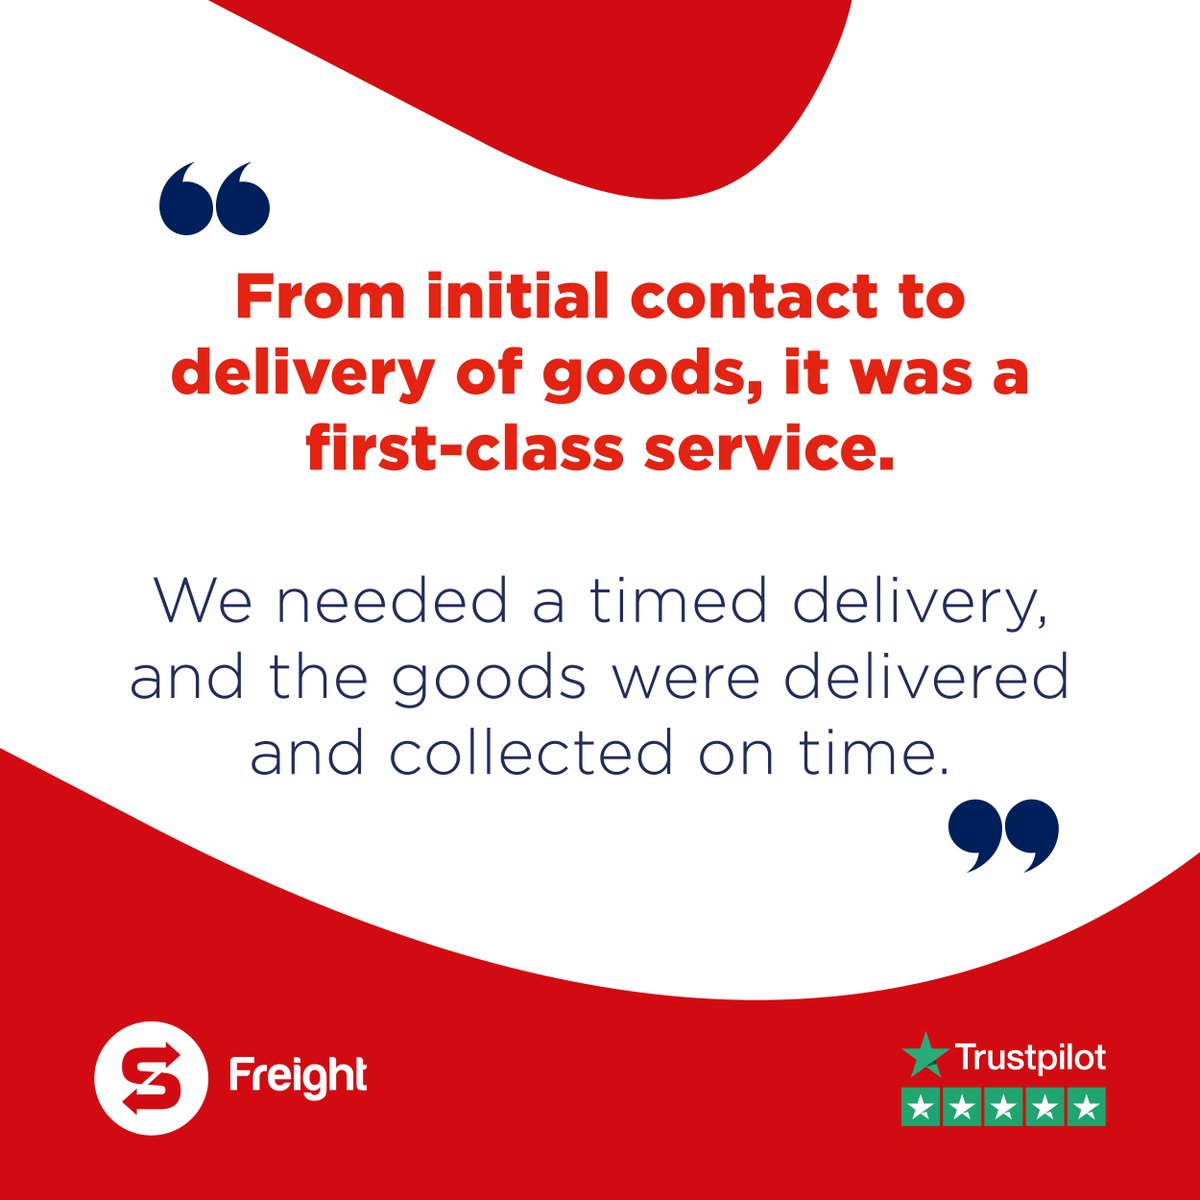 Rain or shine, day or night, you can rely on us to be there when you need us most to deliver anything, anywhere, anytime. ➡️ Learn more about our #logistics services: hubs.la/Q02v1lqQ0 #CustomerReview